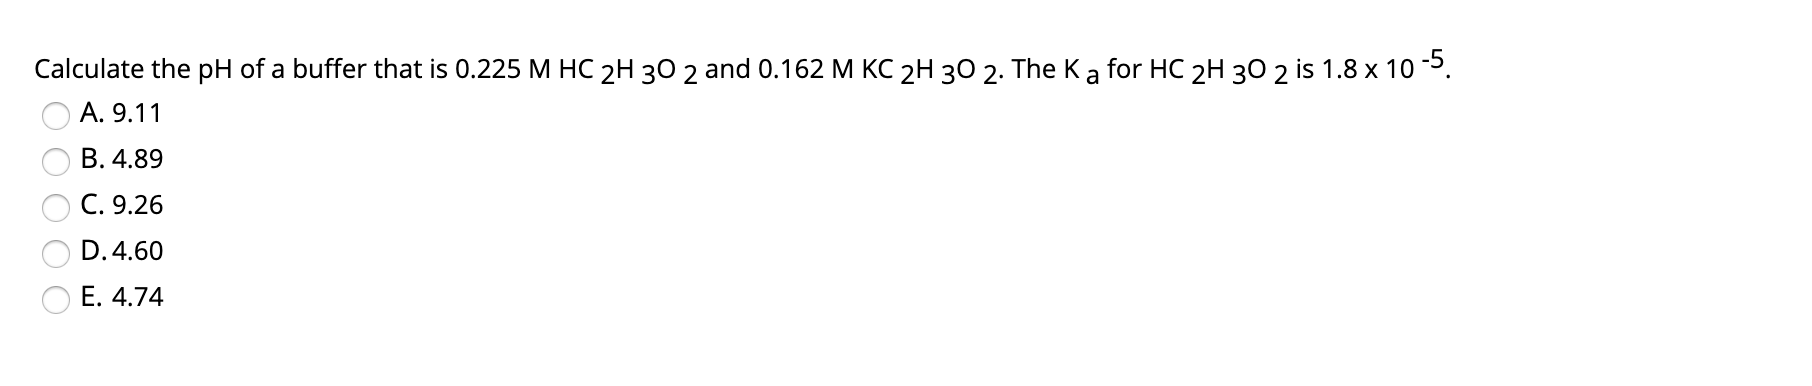 Calculate the pH of a buffer that is 0.225 M HC 2H 30 2 and 0.162 M KC 2H 30 2. The K a for HC 2H 30 2 is 1.8 x 10 .
A. 9.11
B. 4.89
C. 9.26
D. 4.60
E. 4.74
